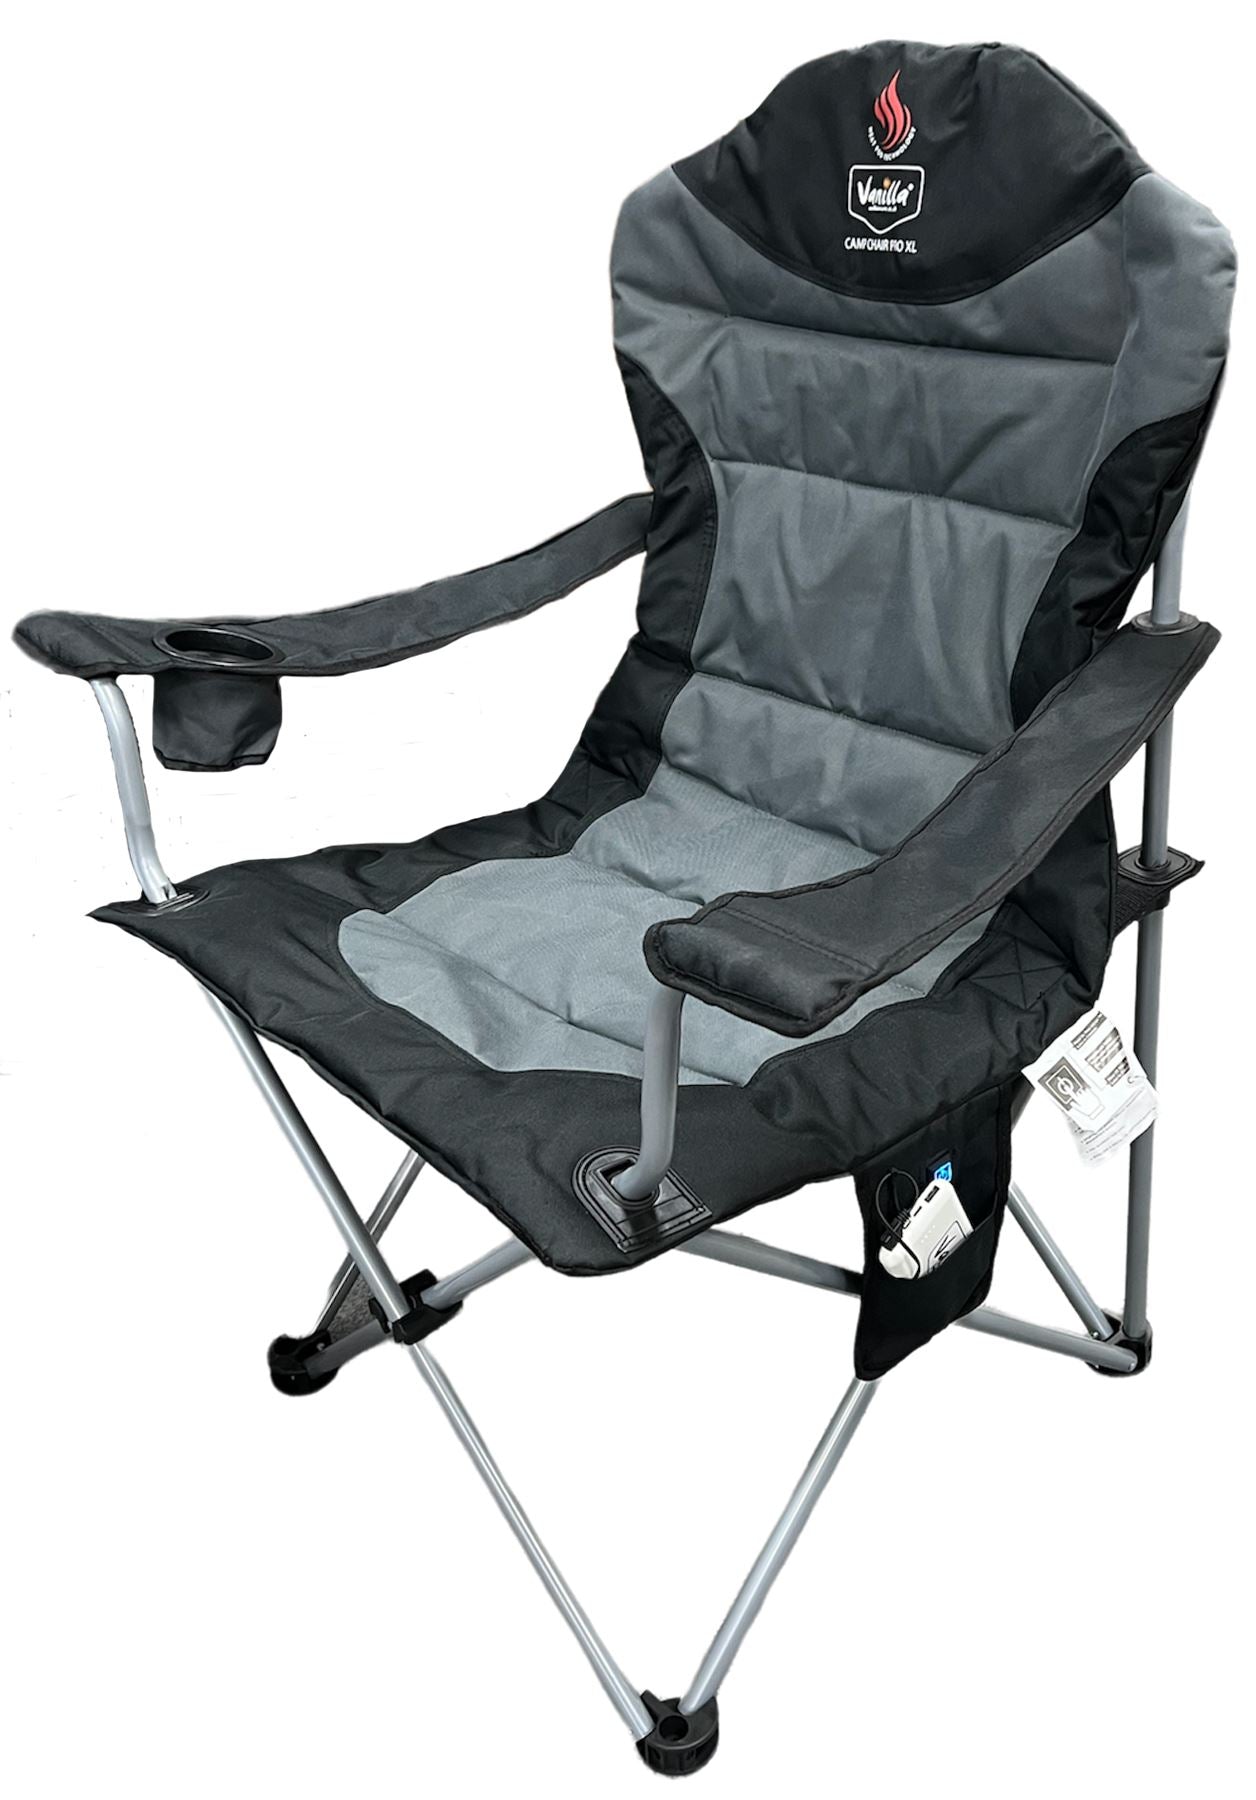 Vanilla Leisure Camp Chair Pro XL (Charcoal) Folding Outdoor Chair wit –  Tamworth Camping